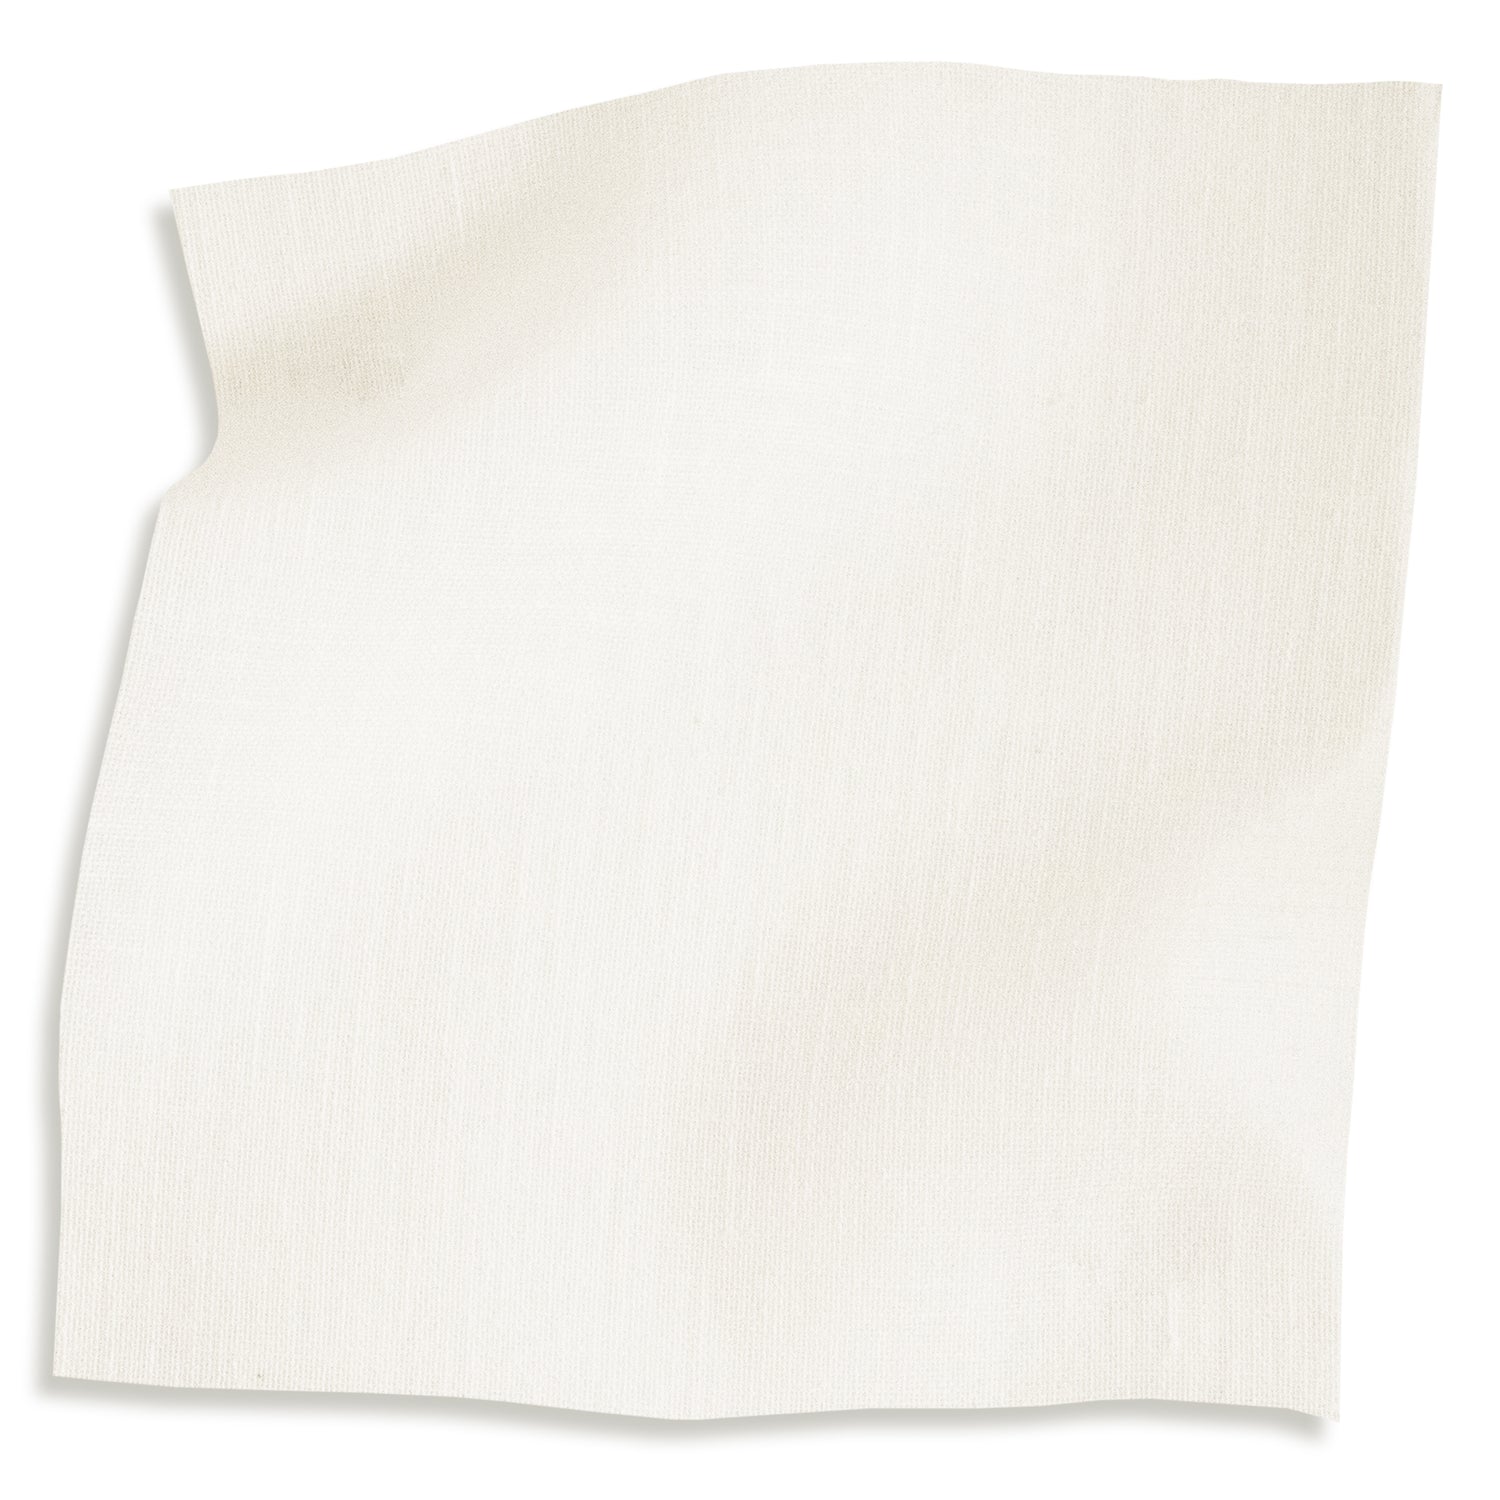 sheer white cotton fabric swatch